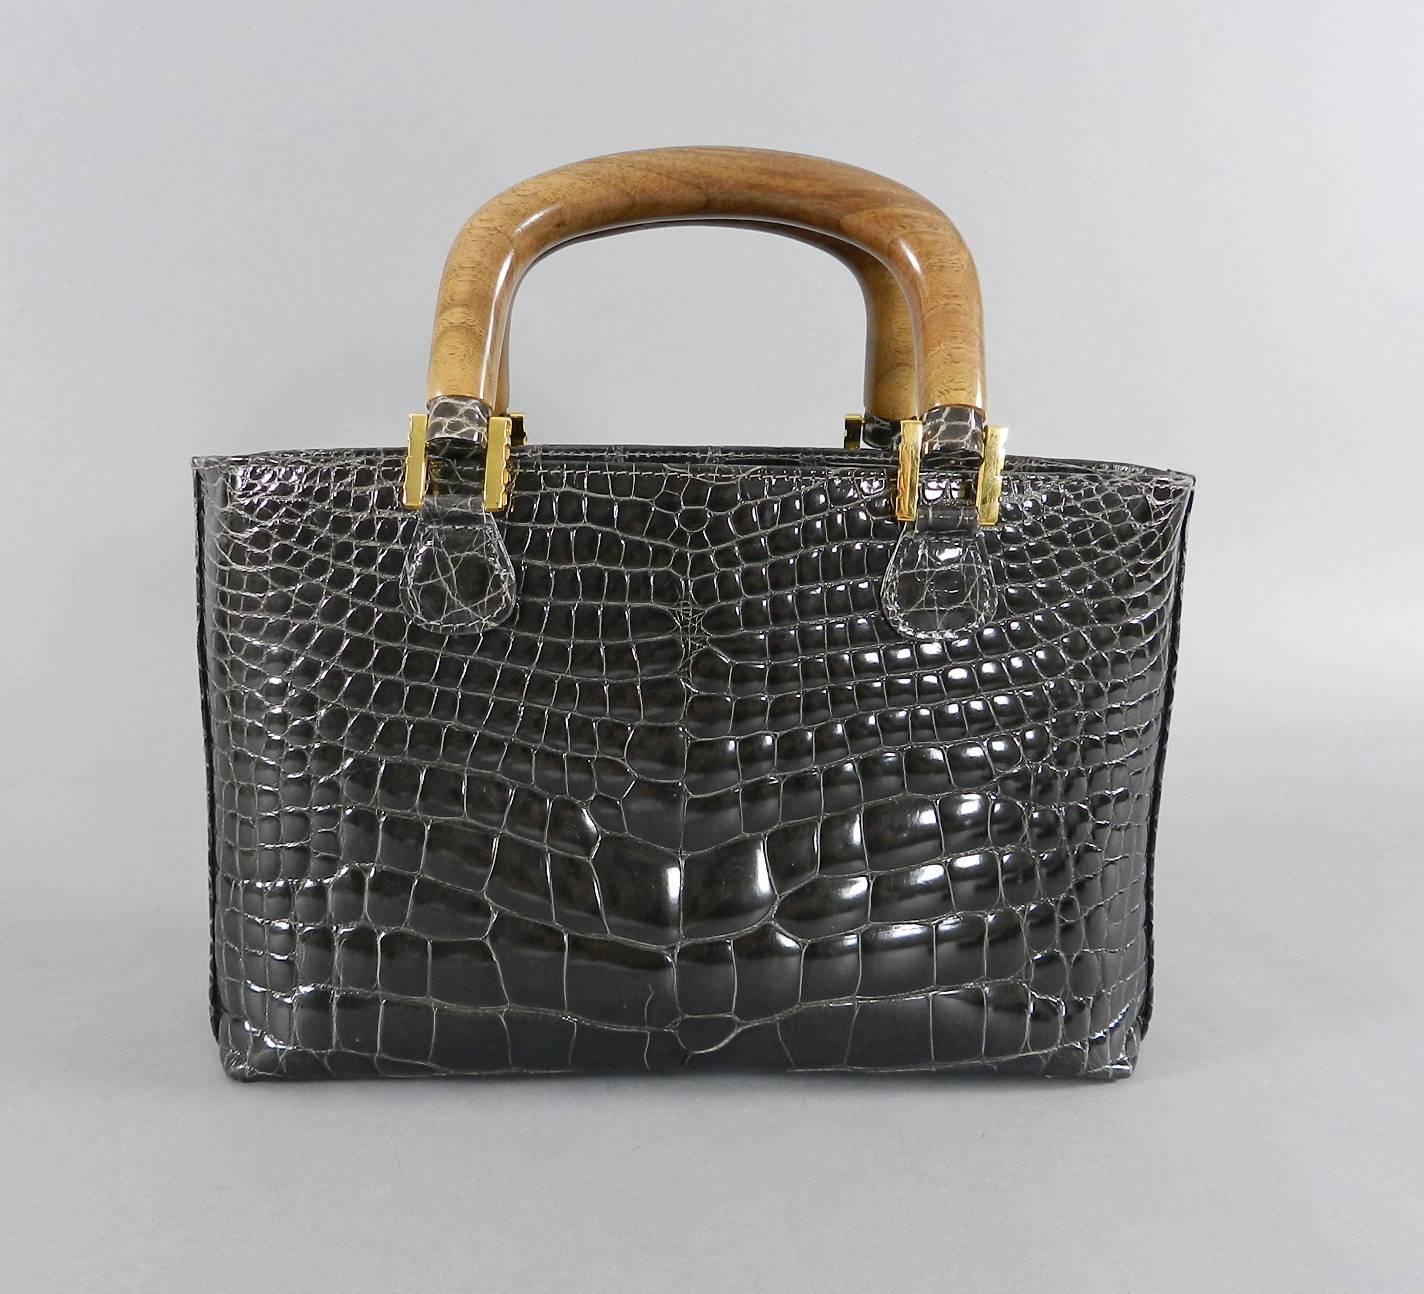 Lana Marks crocodile bag with wood handles, removable shoulder strap, and goldtone metal hardware.  Interior is lined with gray colored material. Color of bag is a dark gray with brownish tone - looks dark brown in some lighting. Measures 10 x 6.5 x